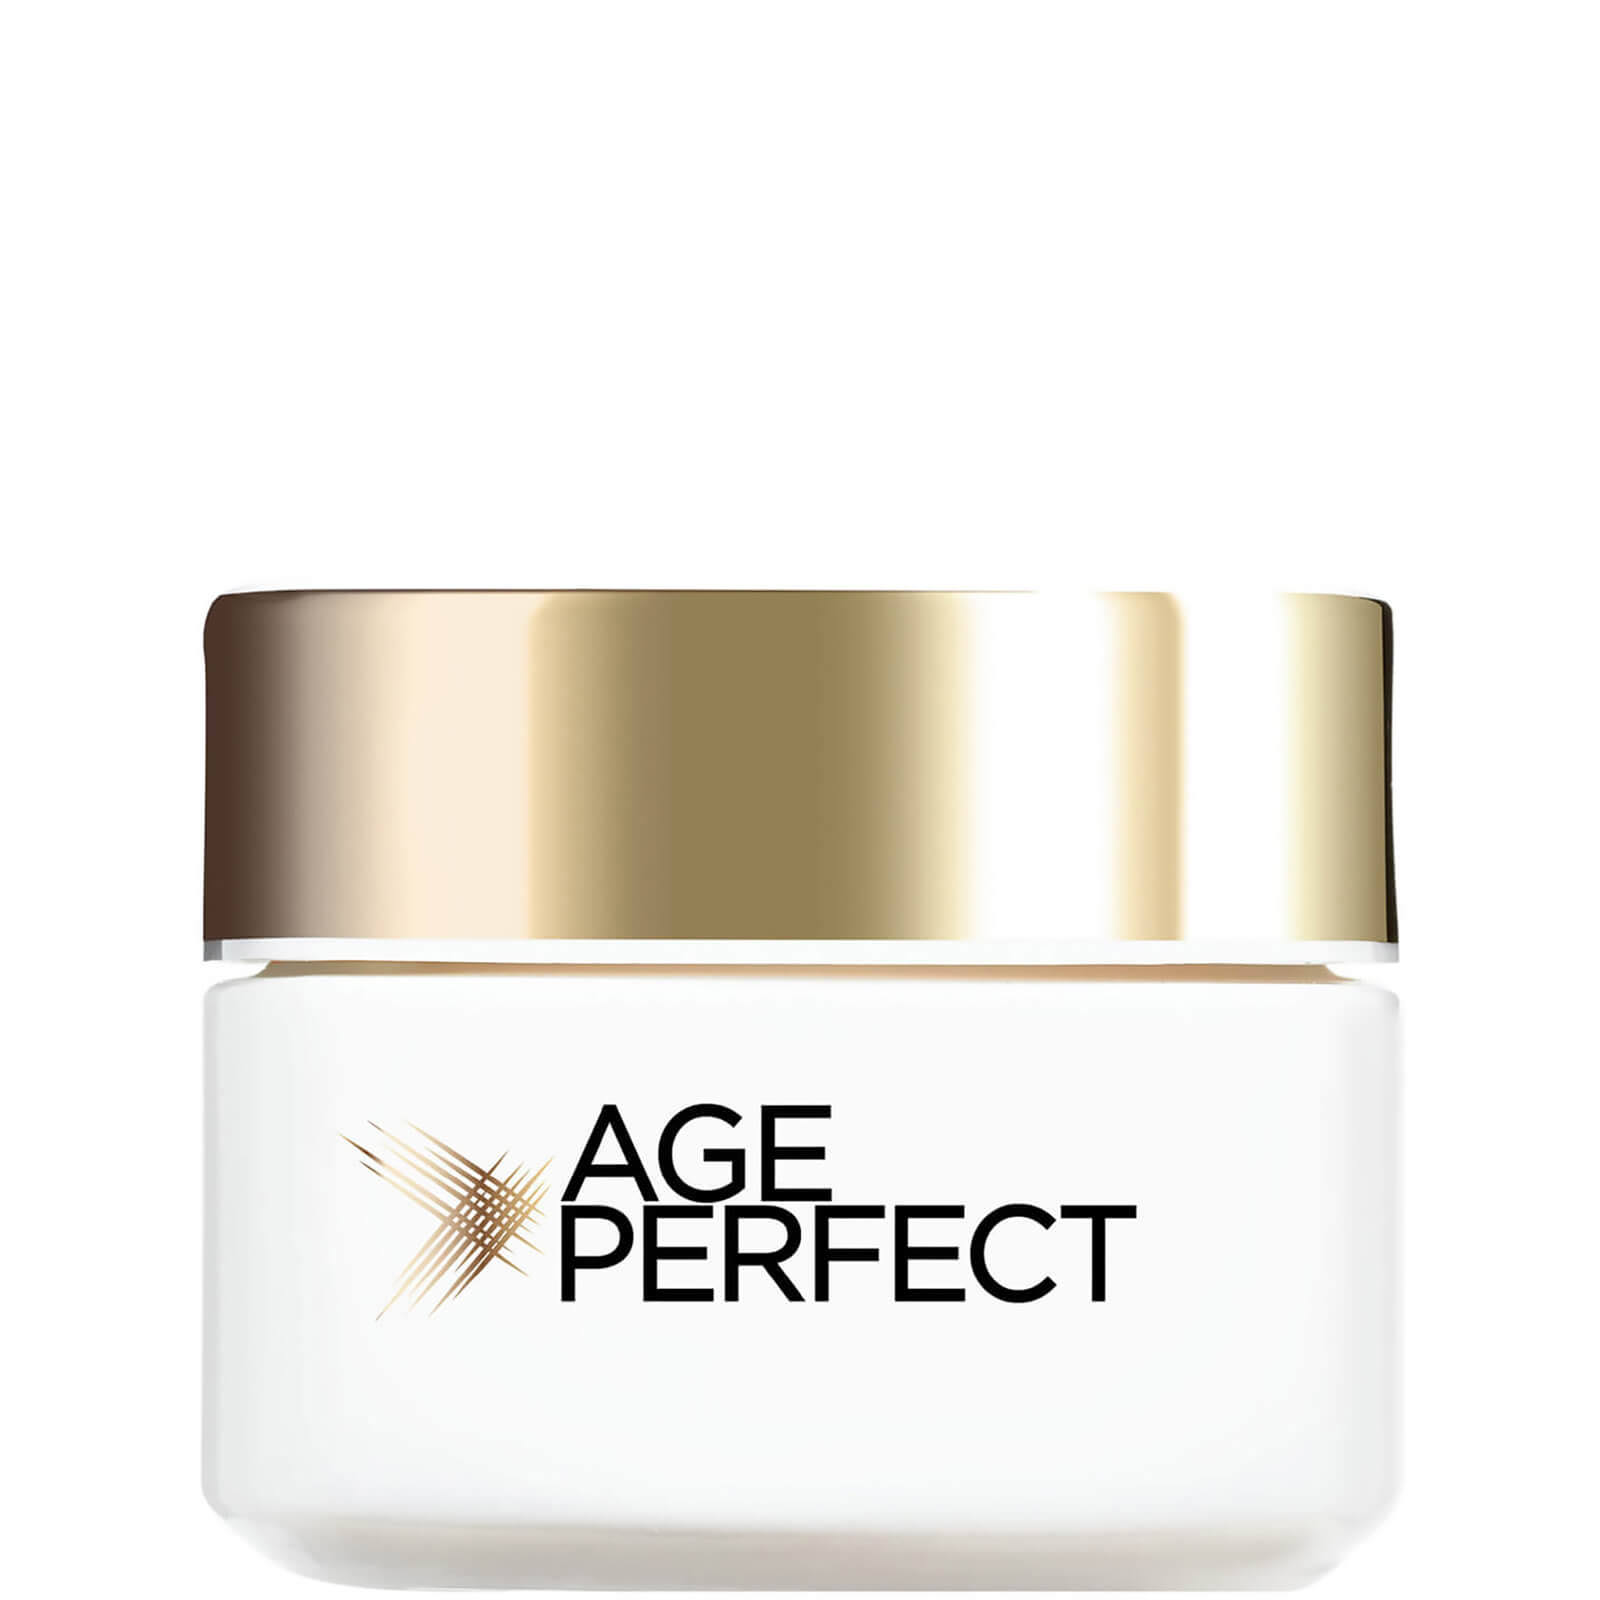 L'Oreal Paris Age Perfect Rehydrating Day Cream - 50ml